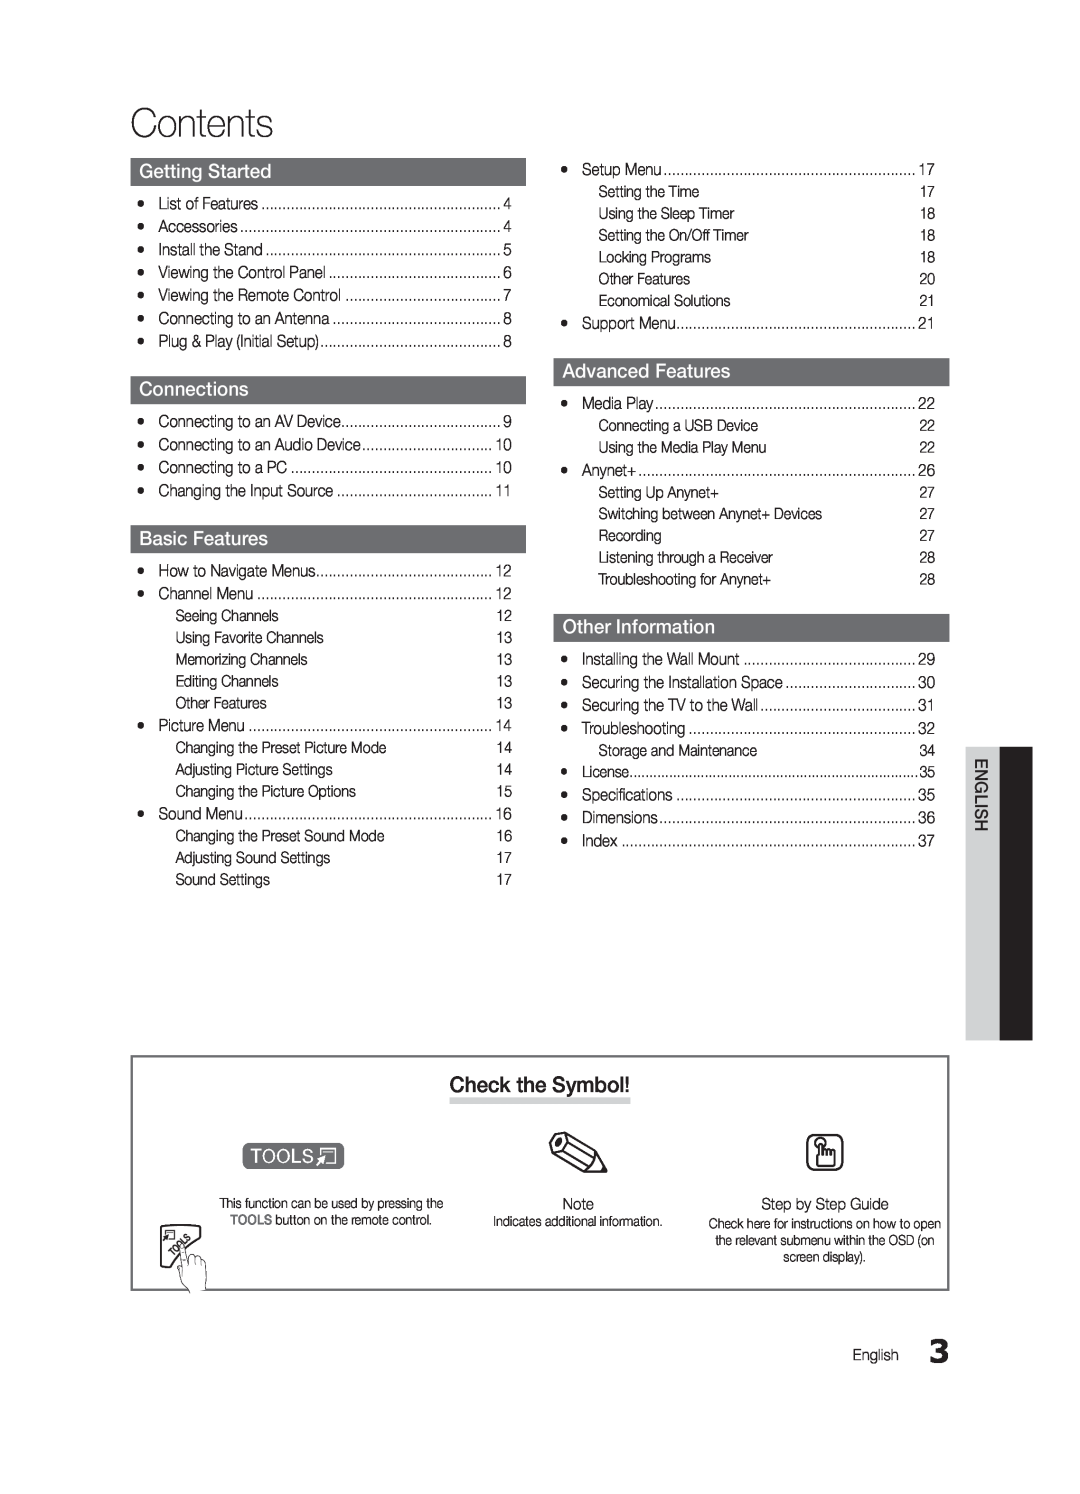 Samsung PC430-ZC user manual Contents, Check the Symbol, Getting Started, Connections, Basic Features, Advanced Features 